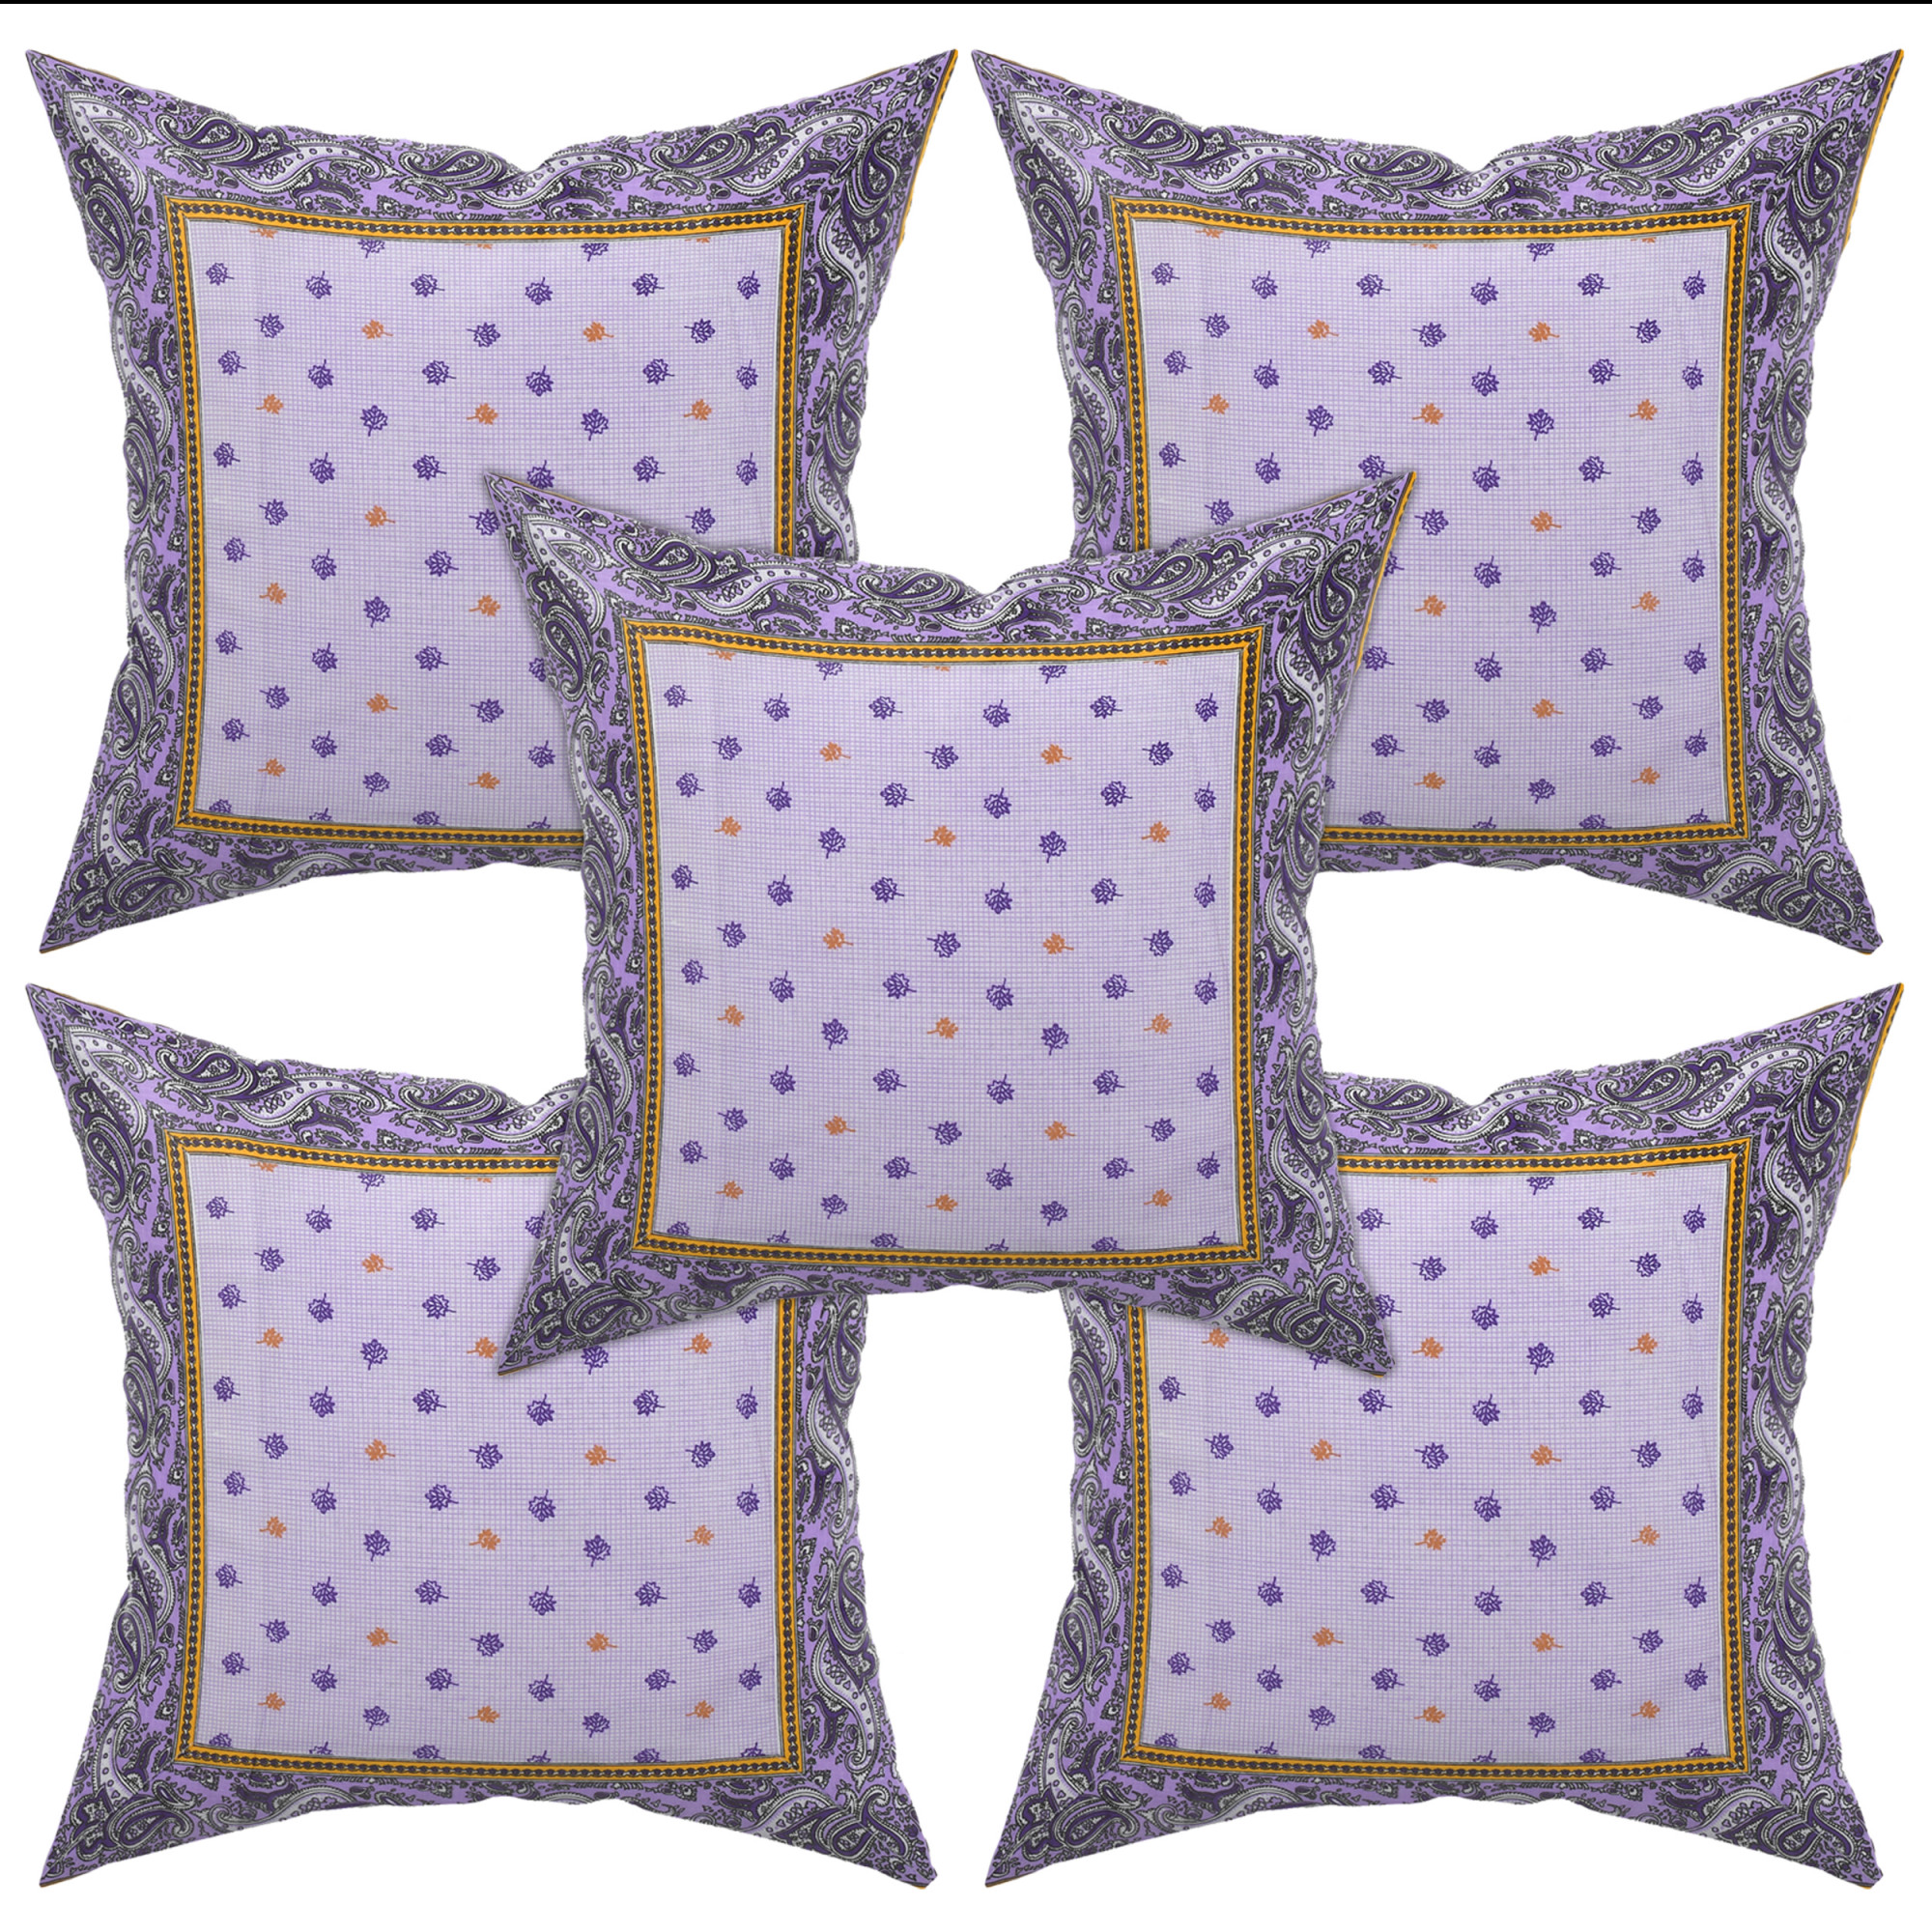 Kuber Industries Leaf Design Cotton Abstract Decorative Throw Pillow/Cushion Covers 16